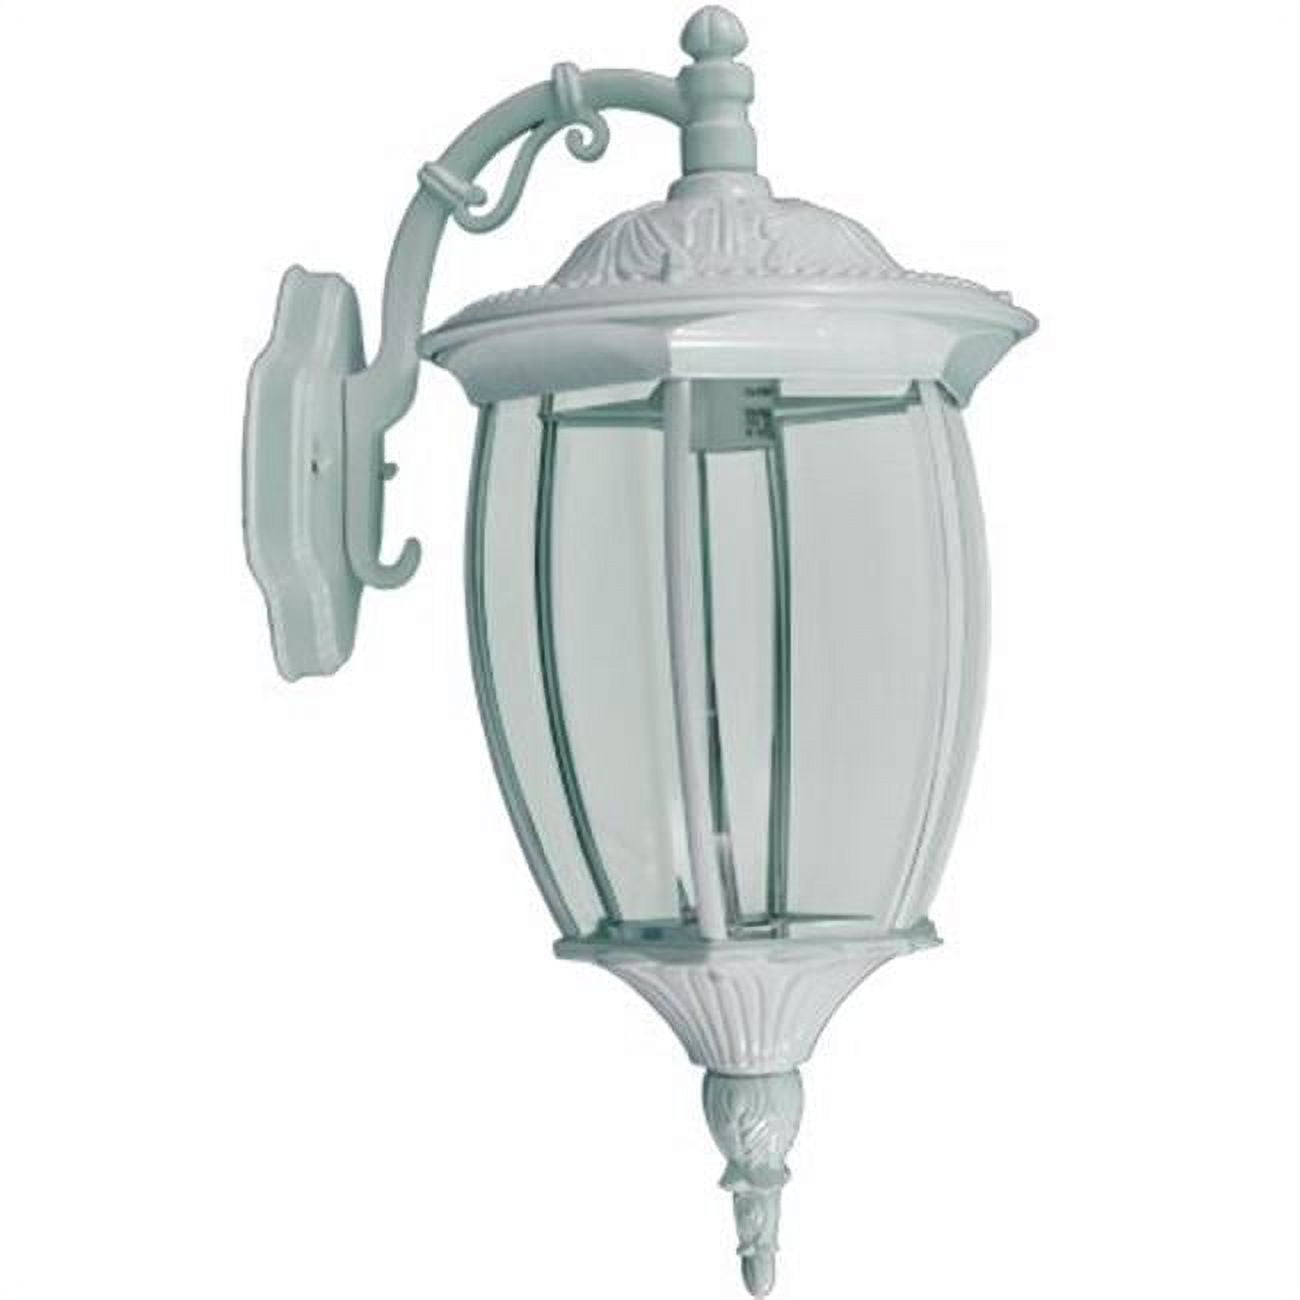 Picture of Dabmar Lighting GM106-W Powder Coated Cast Aluminum Wall Light Fixture, White - 23.50 x 10.63 x 13.56 in.